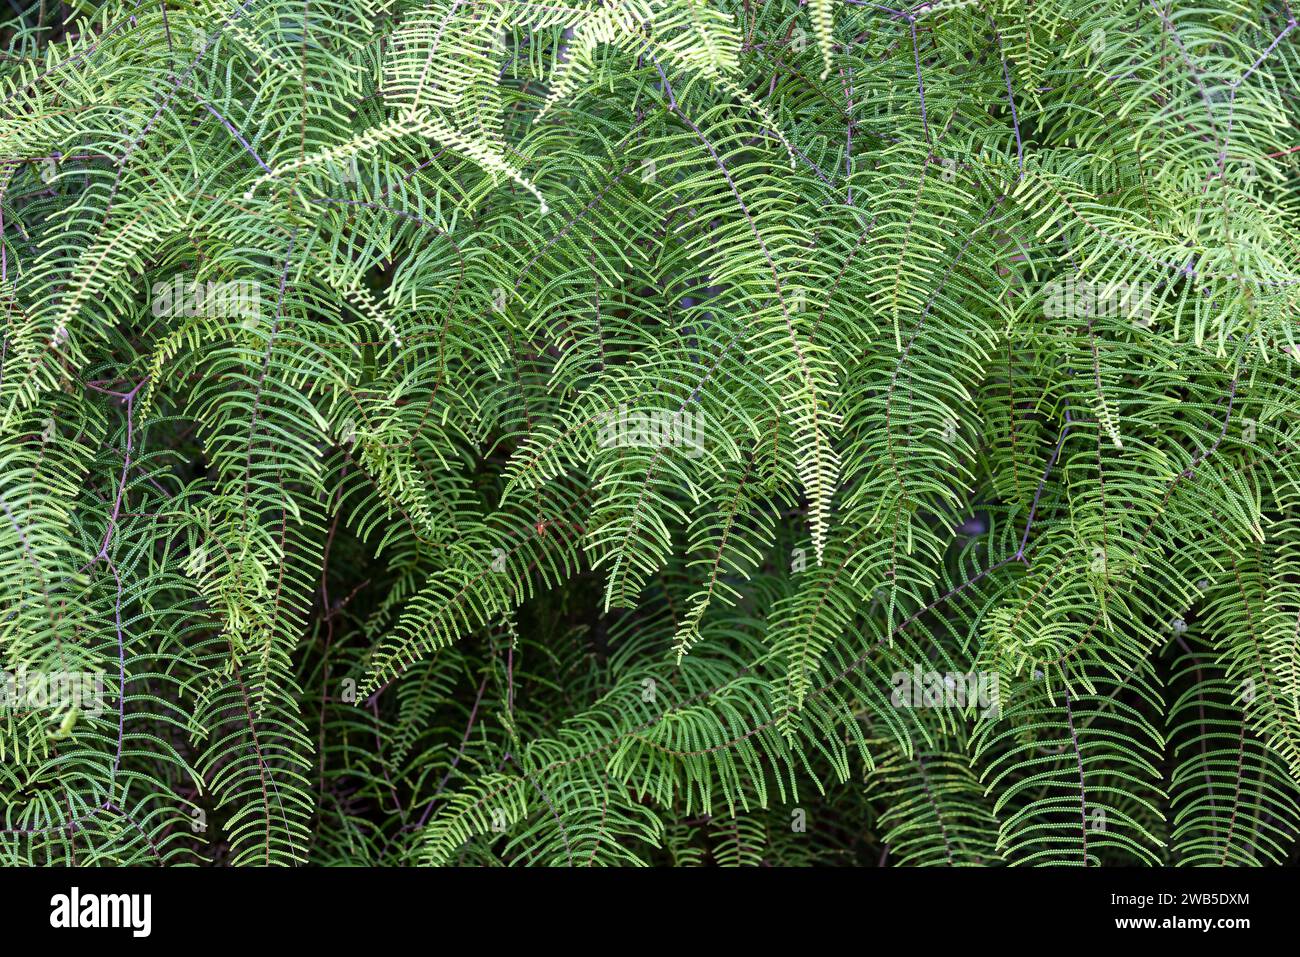 Australian Coral Fern growing in a dense clump Stock Photo